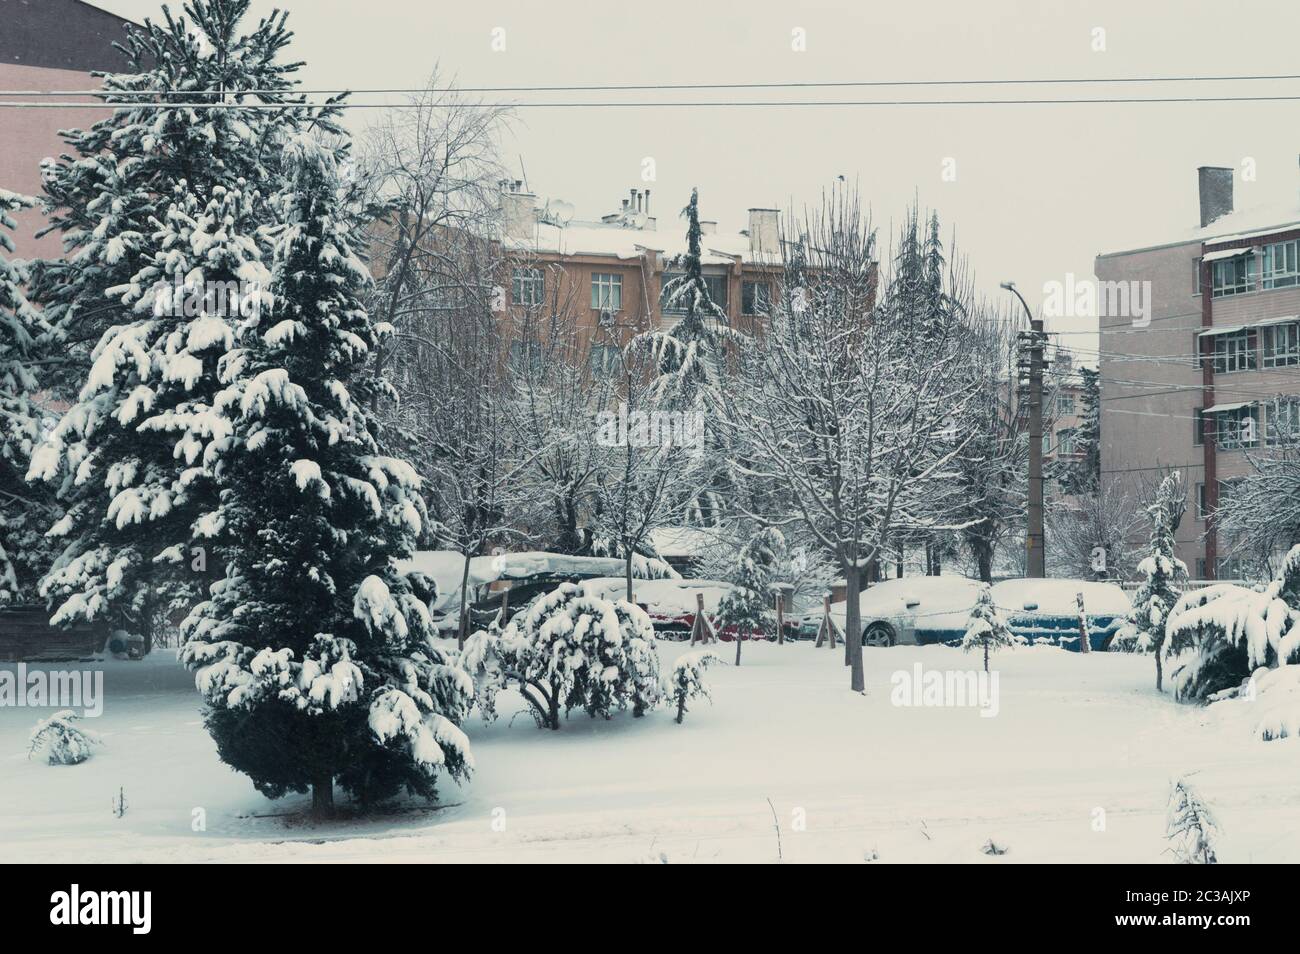 Snow-covered trees, garden and cars. View from the window. Stock Photo